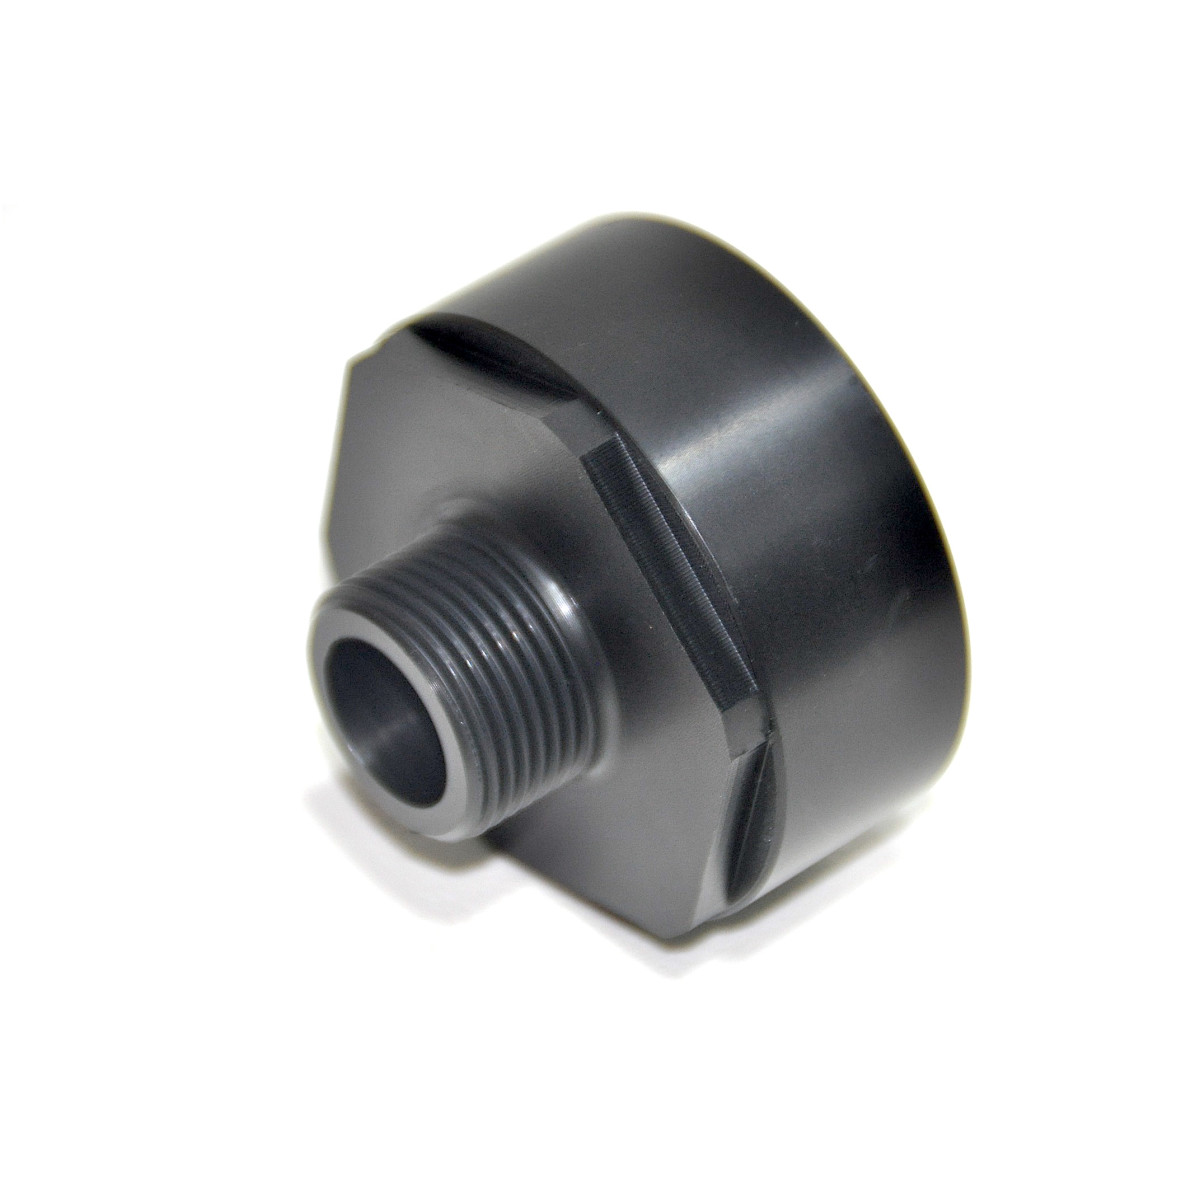 Adapters with Male thread